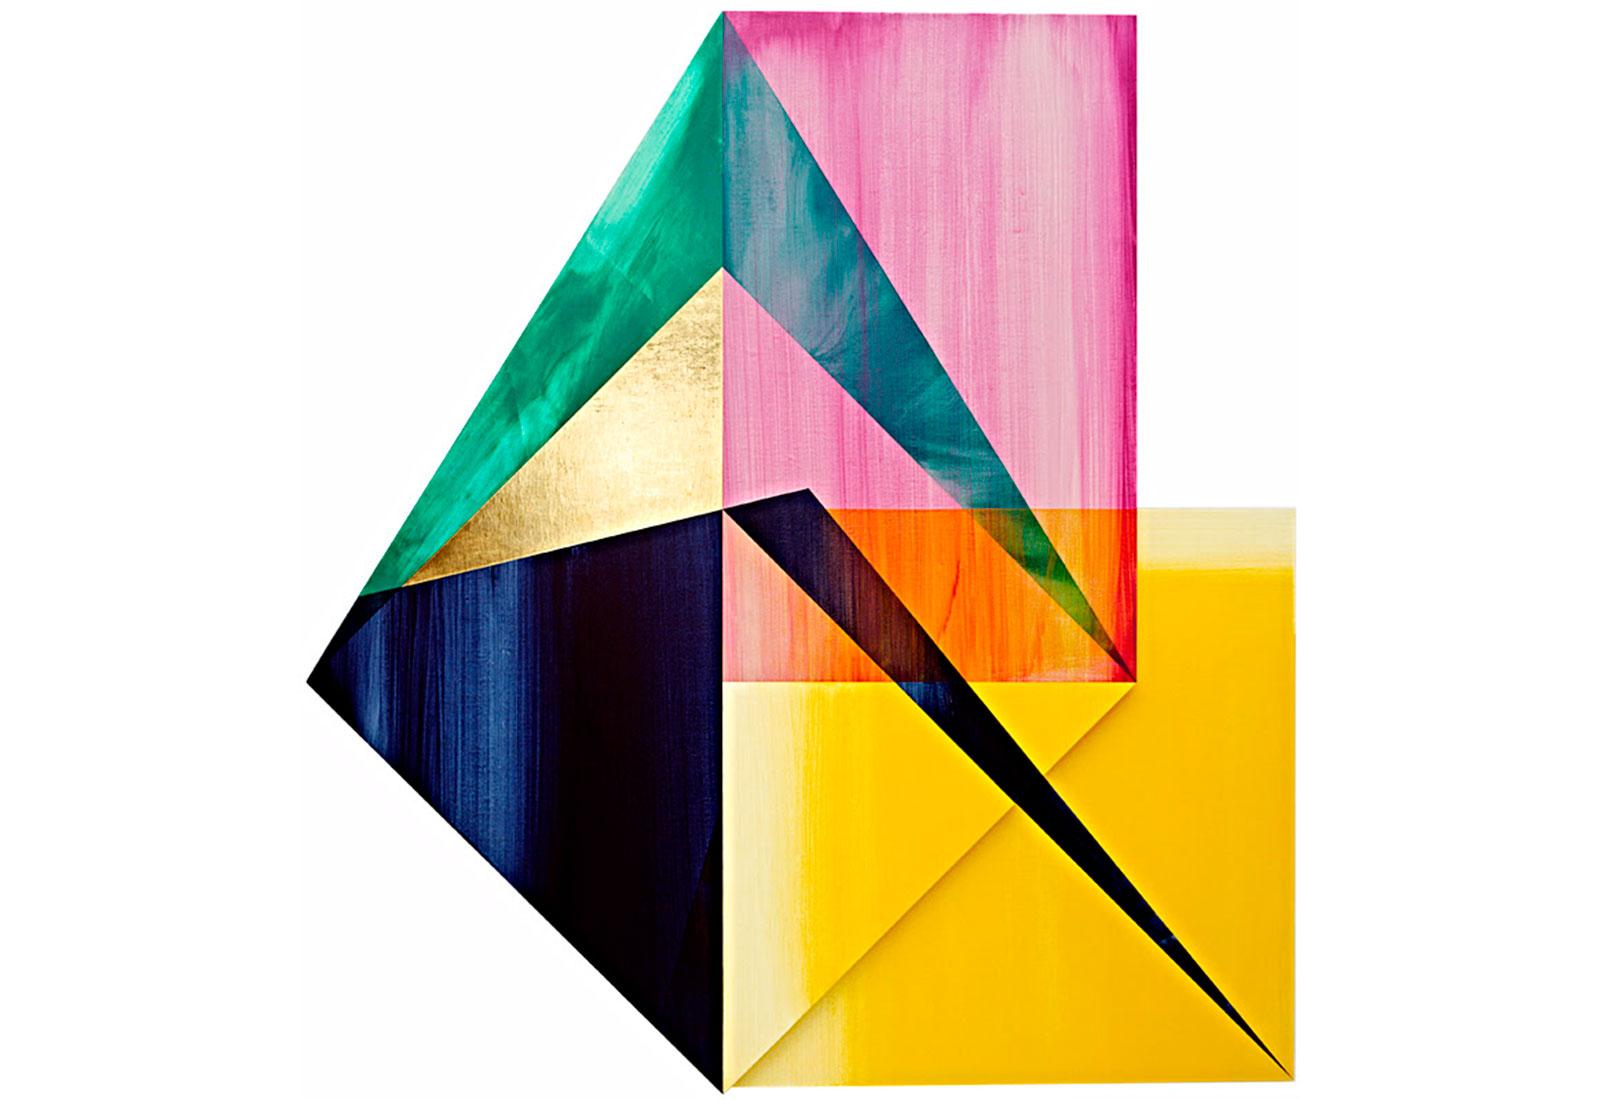 Dorthea Rockburne, Golden Section Painting, Parallelogram with Two Small Squares, 1974. 